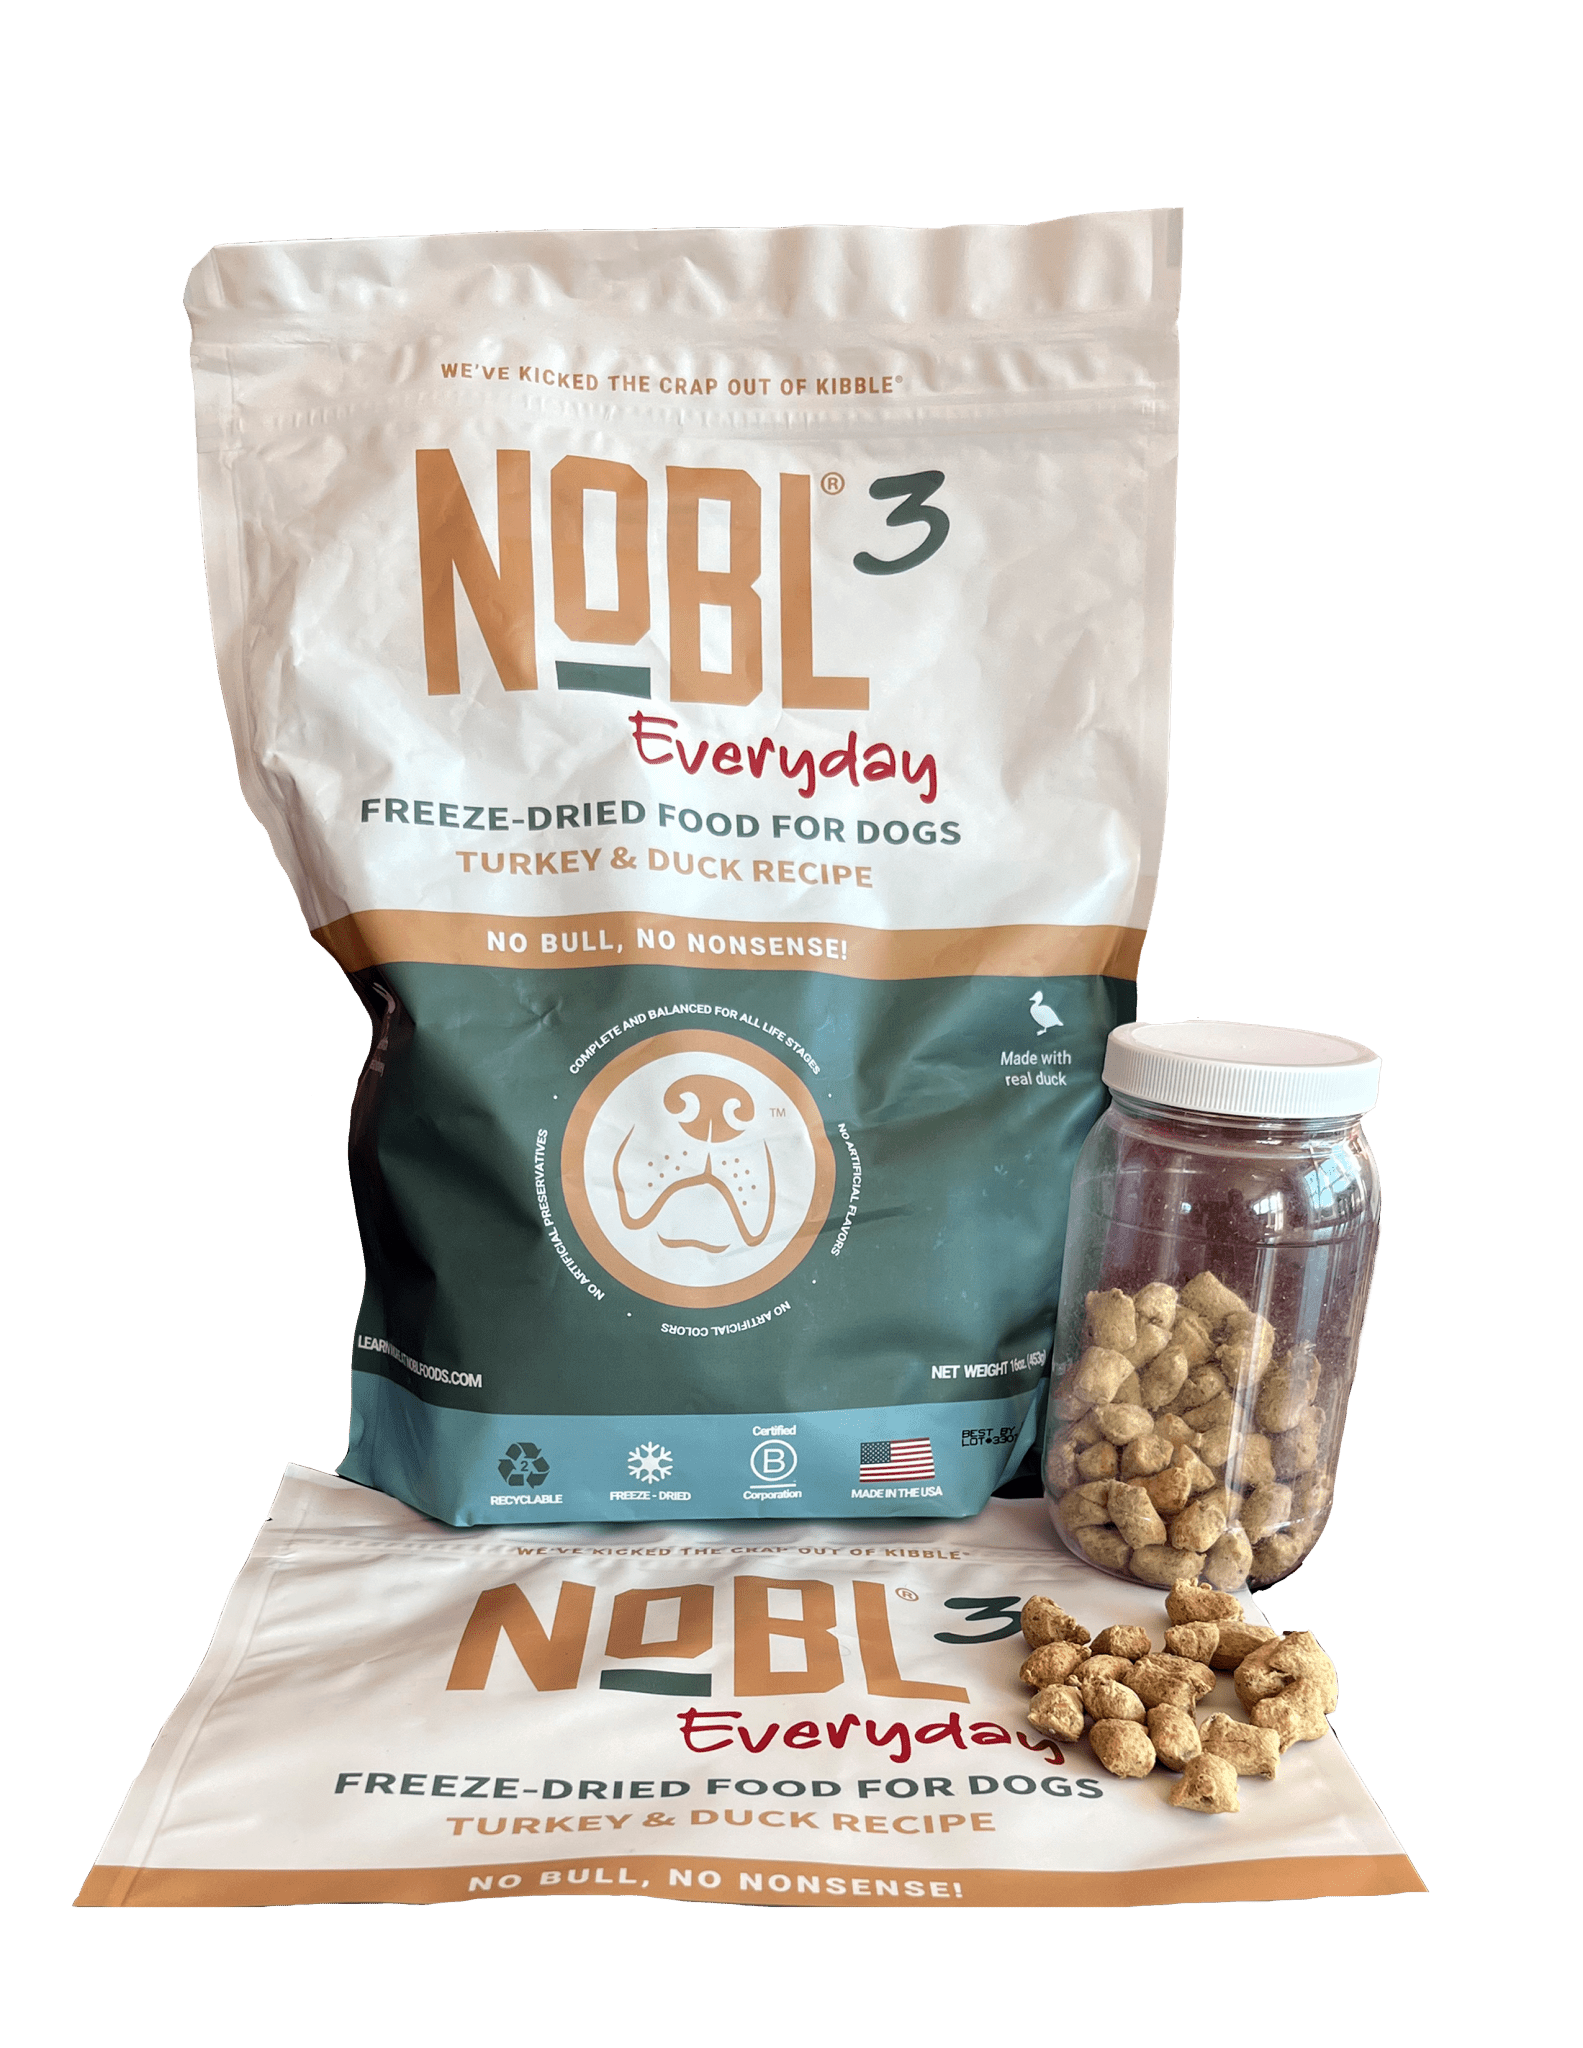 NOBL3 Everyday Turkey & Duck Recipe - All Life Stages - 16oz - NOBL Foods